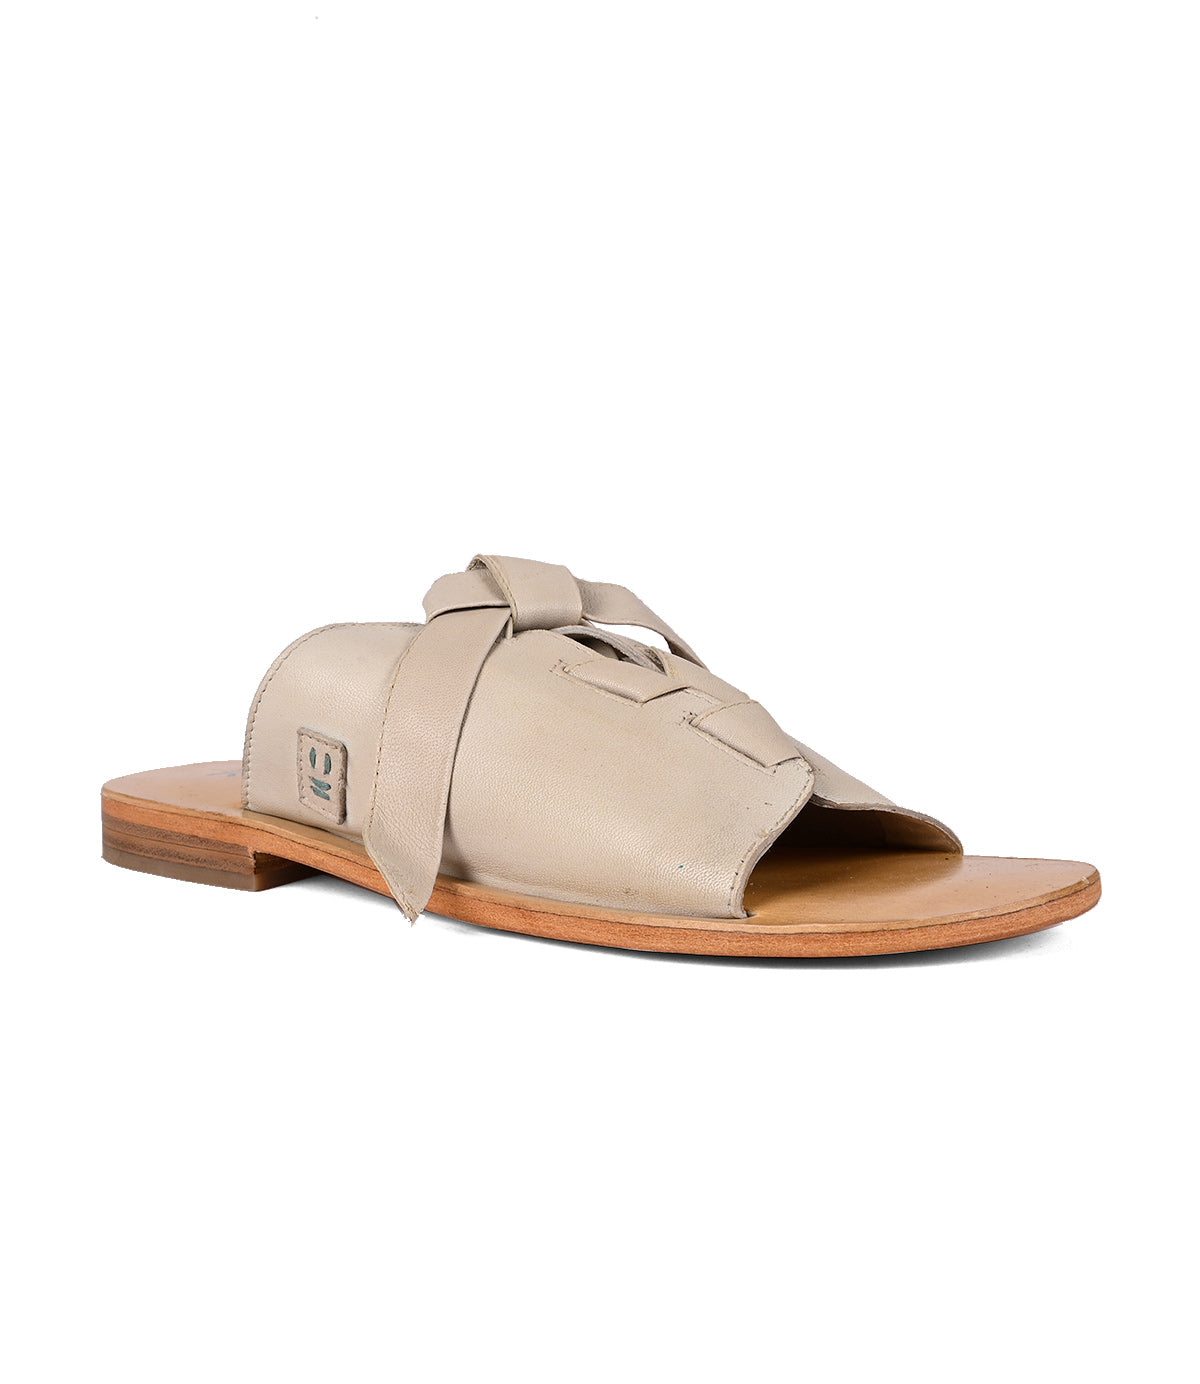 Beige Roan women's Grapevine slide sandal with a bow detail and adjustable leather straps on a white background.